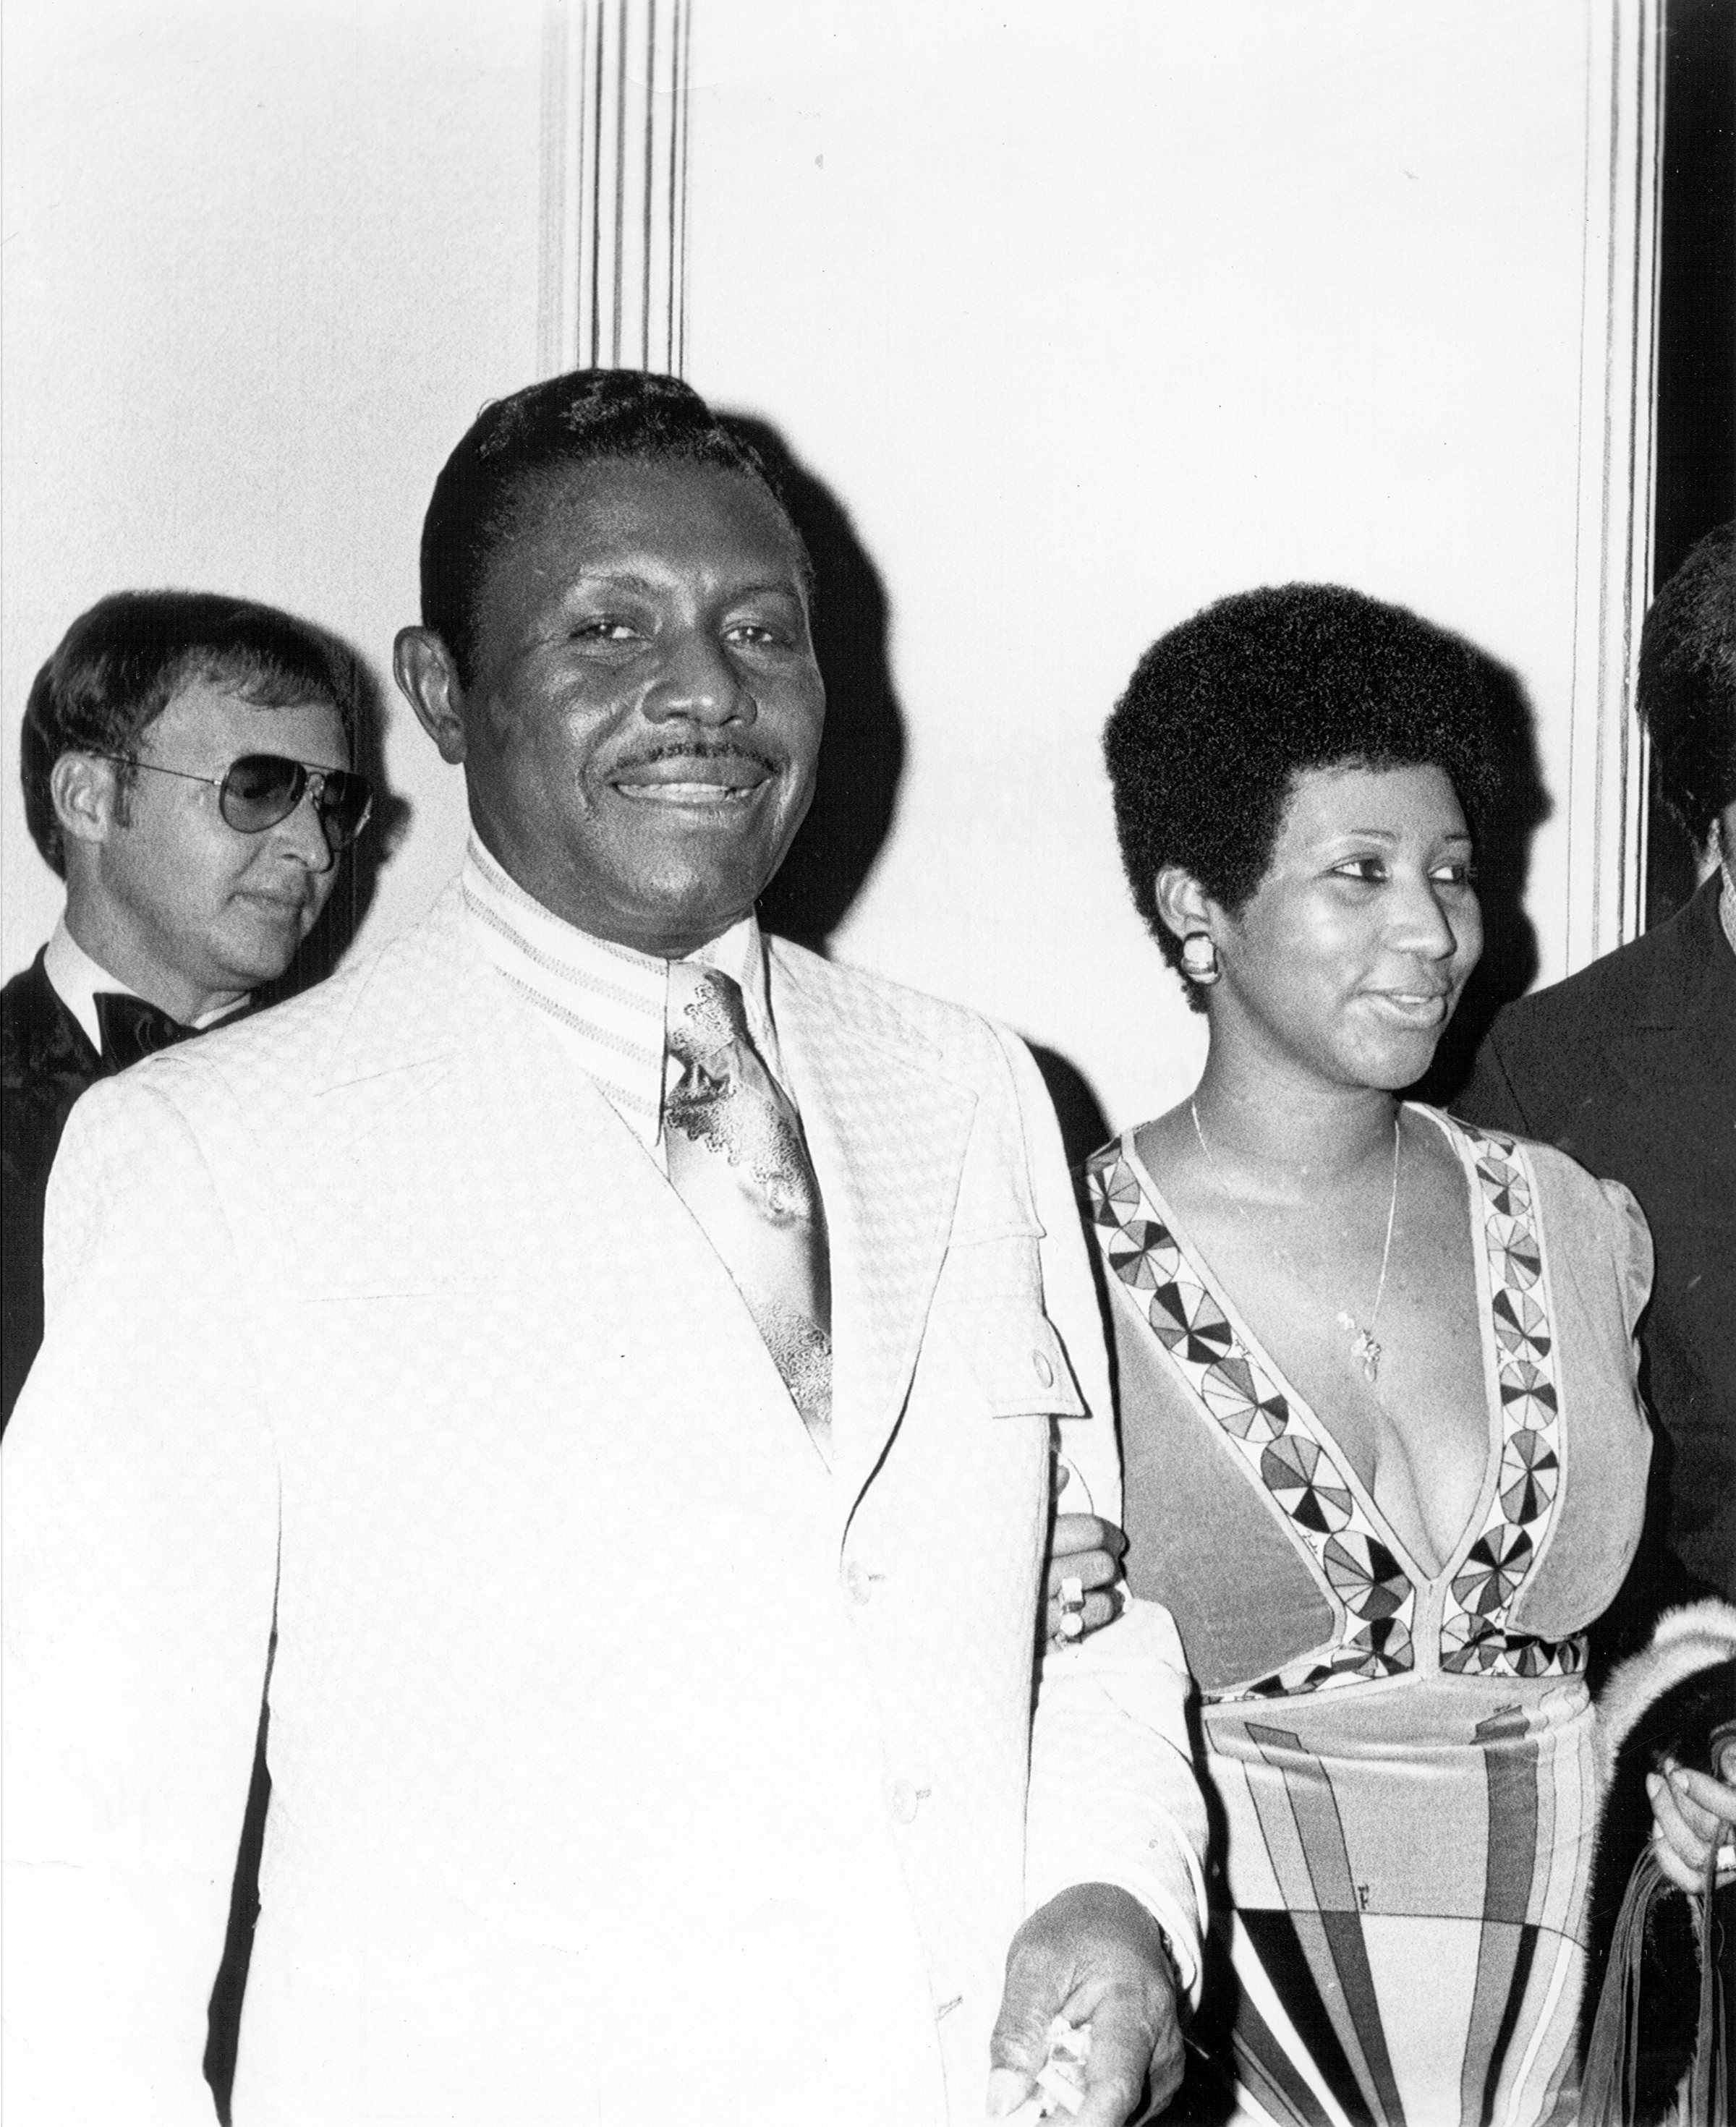 The Reverend C.L. Franklin and his daughter singer Aretha Franklin attend an event circa 1975. | Source: Getty Images